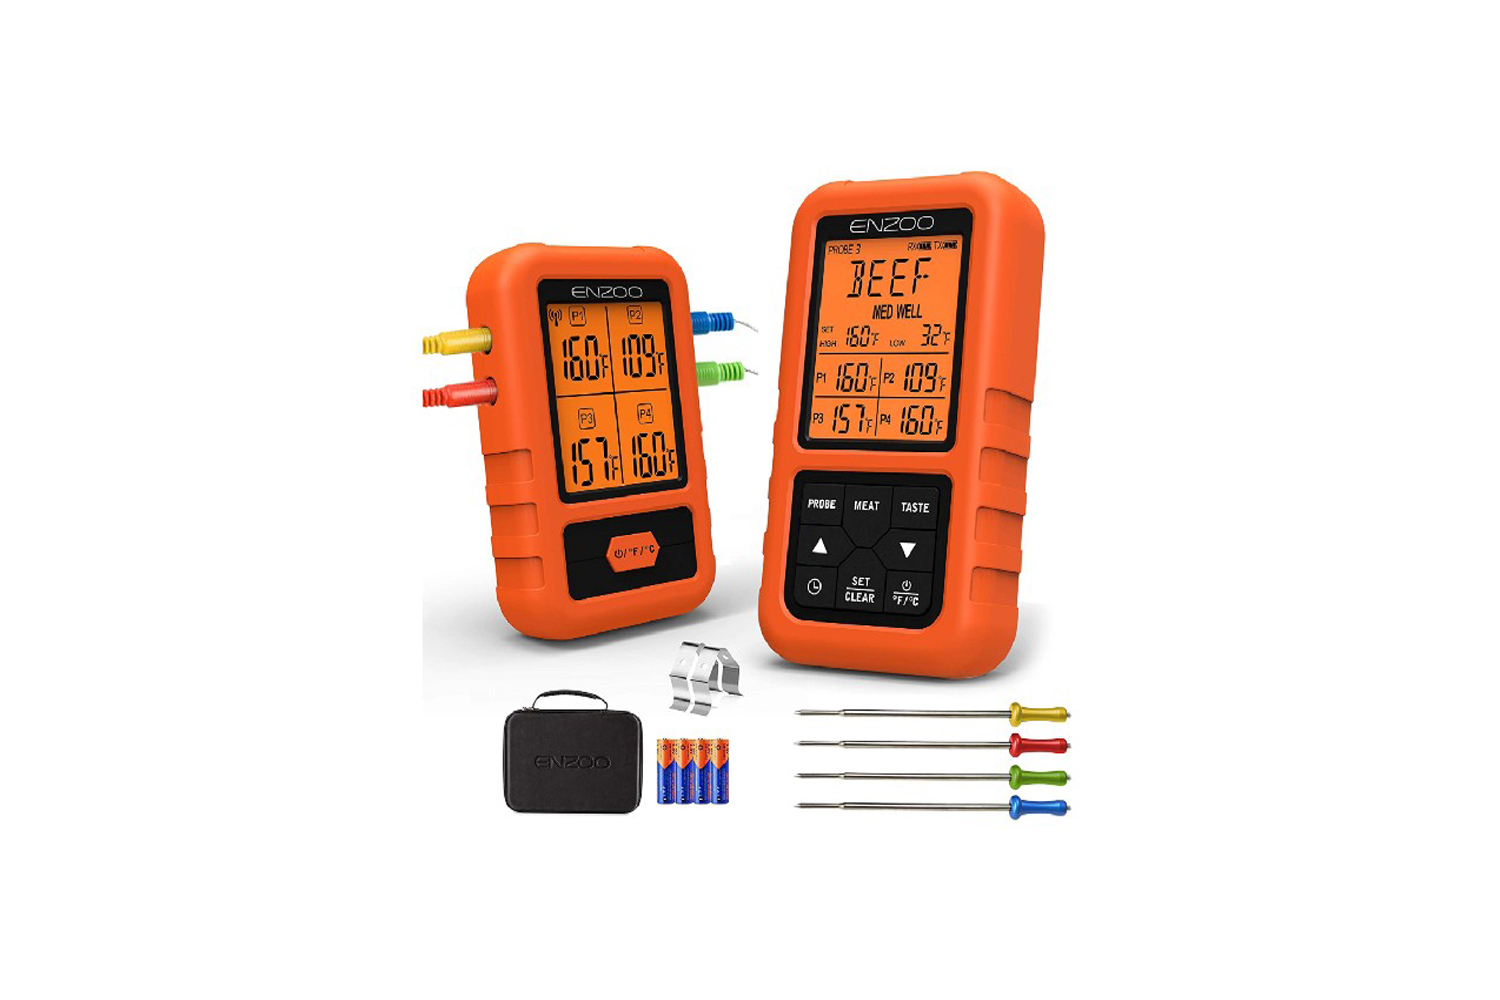 https://www.themanual.com/wp-content/uploads/sites/9/2022/03/enzoo-wireless-meat-thermometer.jpg?fit=800%2C800&p=1